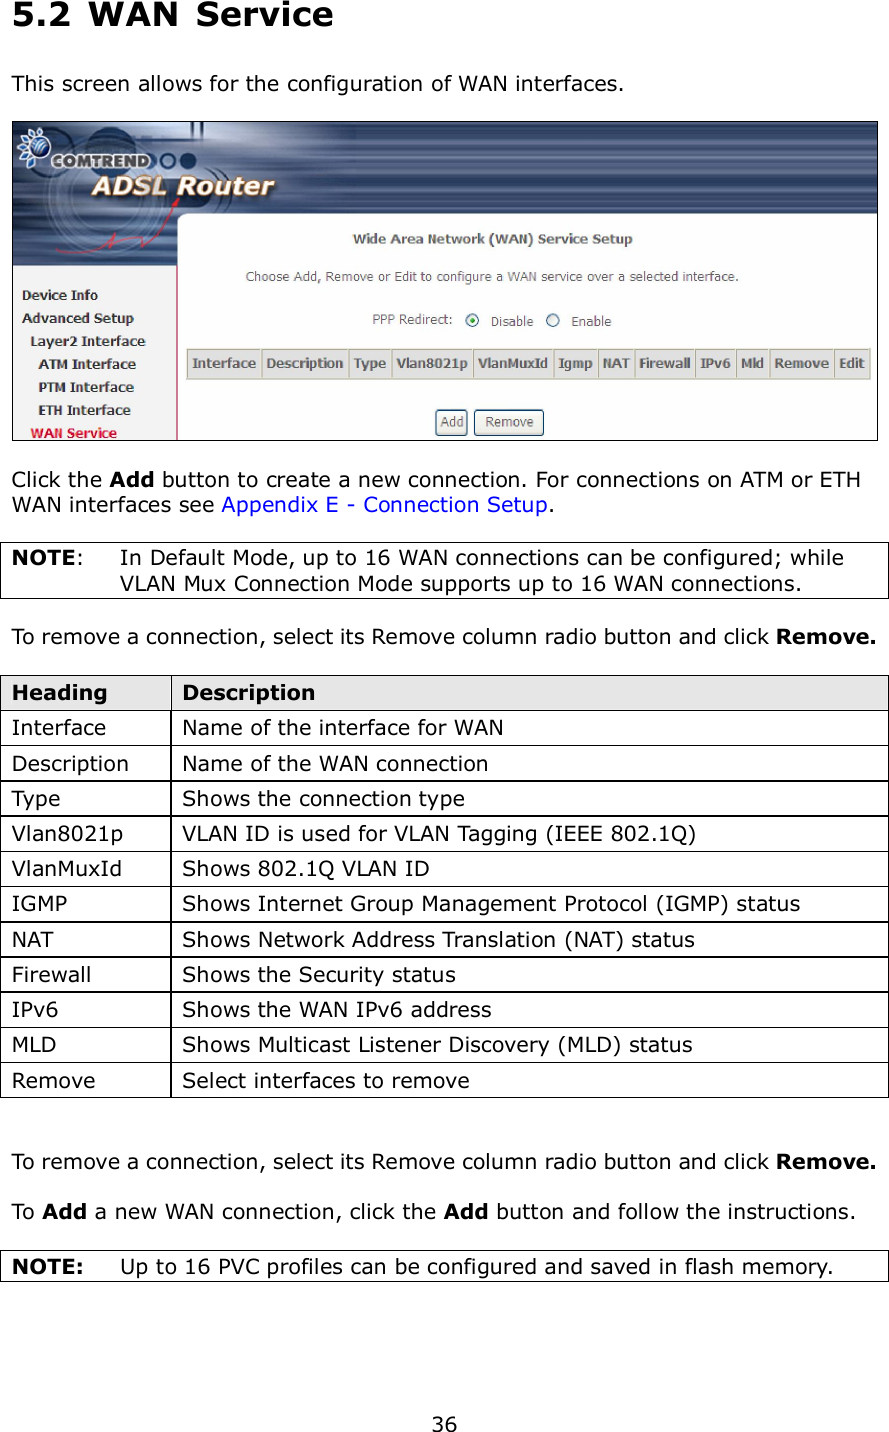  36 5.2  WAN  Service This screen allows for the configuration of WAN interfaces.    Click the Add button to create a new connection. For connections on ATM or ETH WAN interfaces see Appendix E - Connection Setup.    NOTE:  In Default Mode, up to 16 WAN connections can be configured; while VLAN Mux Connection Mode supports up to 16 WAN connections.  To remove a connection, select its Remove column radio button and click Remove.  Heading  Description Interface    Name of the interface for WAN Description  Name of the WAN connection Type  Shows the connection type   Vlan8021p  VLAN ID is used for VLAN Tagging (IEEE 802.1Q) VlanMuxId  Shows 802.1Q VLAN ID IGMP  Shows Internet Group Management Protocol (IGMP) status NAT  Shows Network Address Translation (NAT) status Firewall  Shows the Security status IPv6  Shows the WAN IPv6 address MLD  Shows Multicast Listener Discovery (MLD) status Remove  Select interfaces to remove   To remove a connection, select its Remove column radio button and click Remove.  To Add a new WAN connection, click the Add button and follow the instructions.  NOTE:  Up to 16 PVC profiles can be configured and saved in flash memory.      